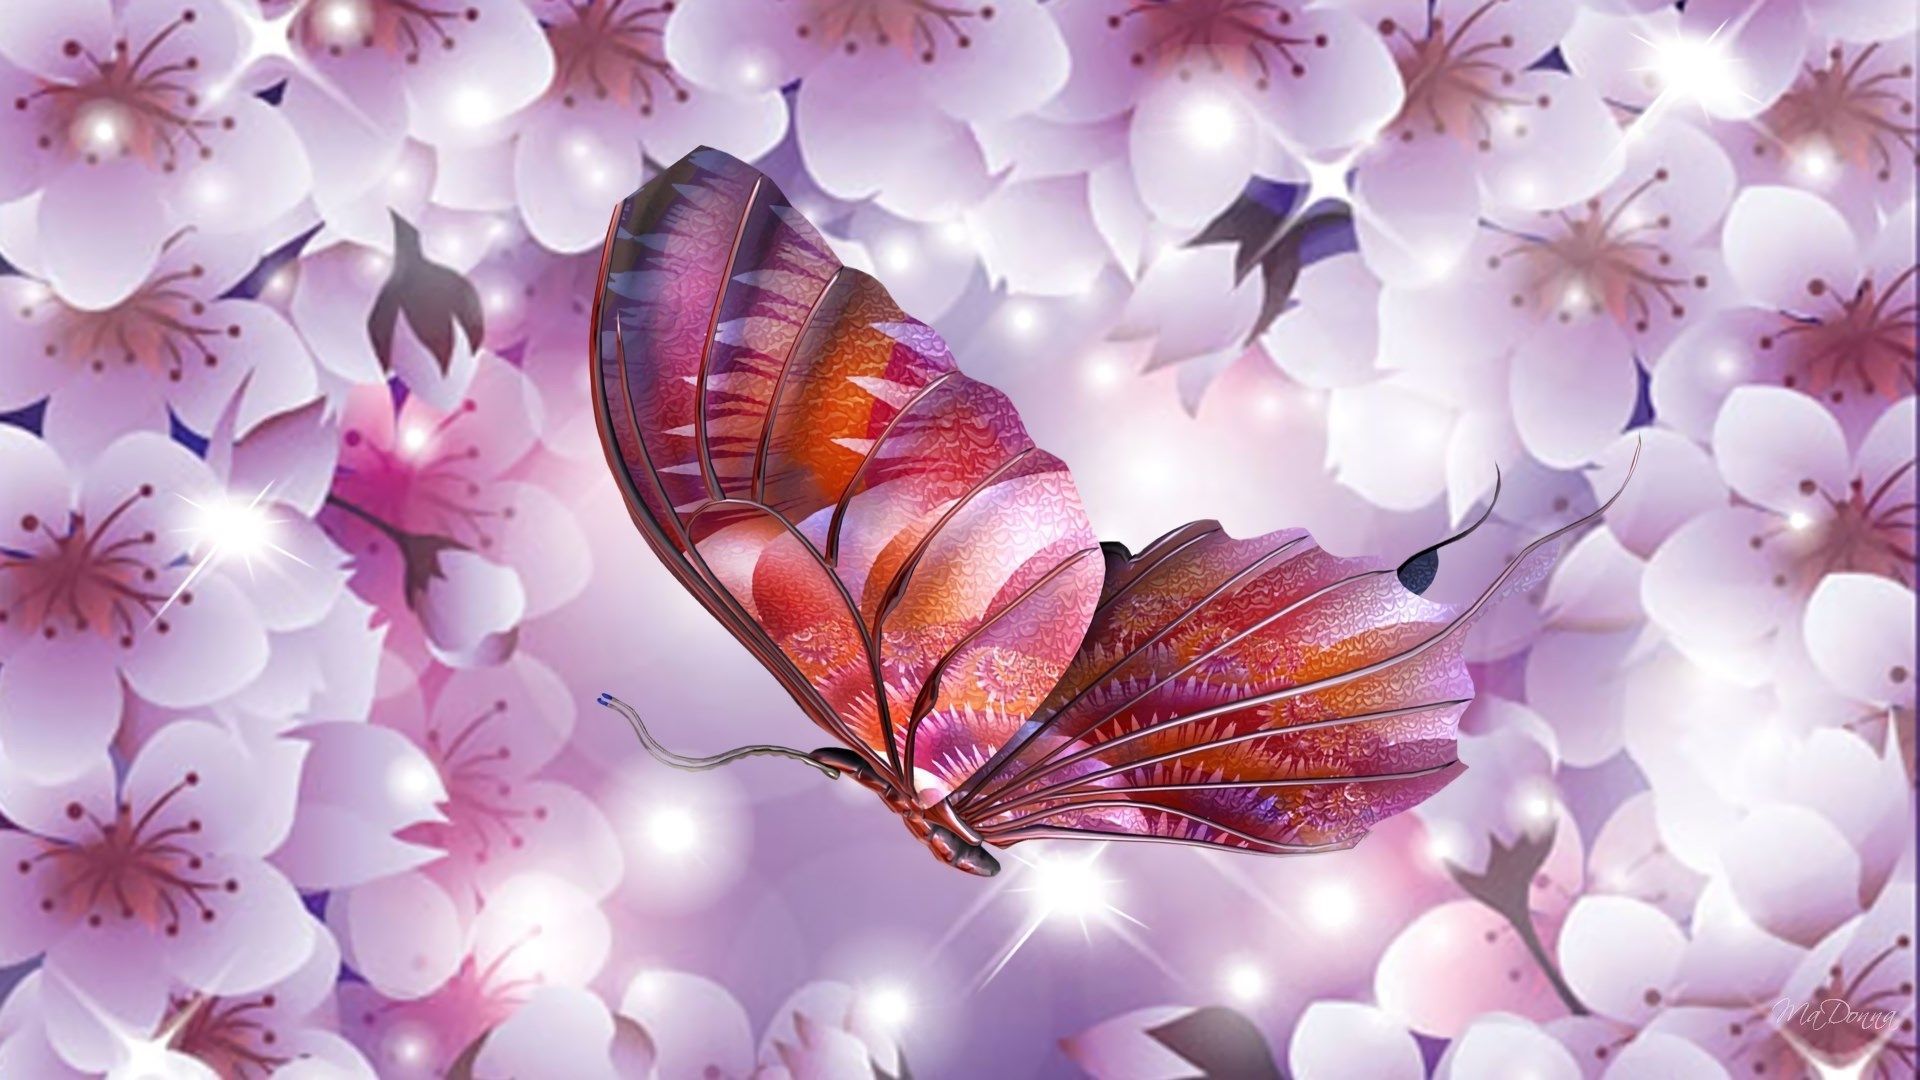 butterfly, Wallpaper Collection 1920x1080. Cherry blossom wallpaper, Butterfly wallpaper, Cross paintings